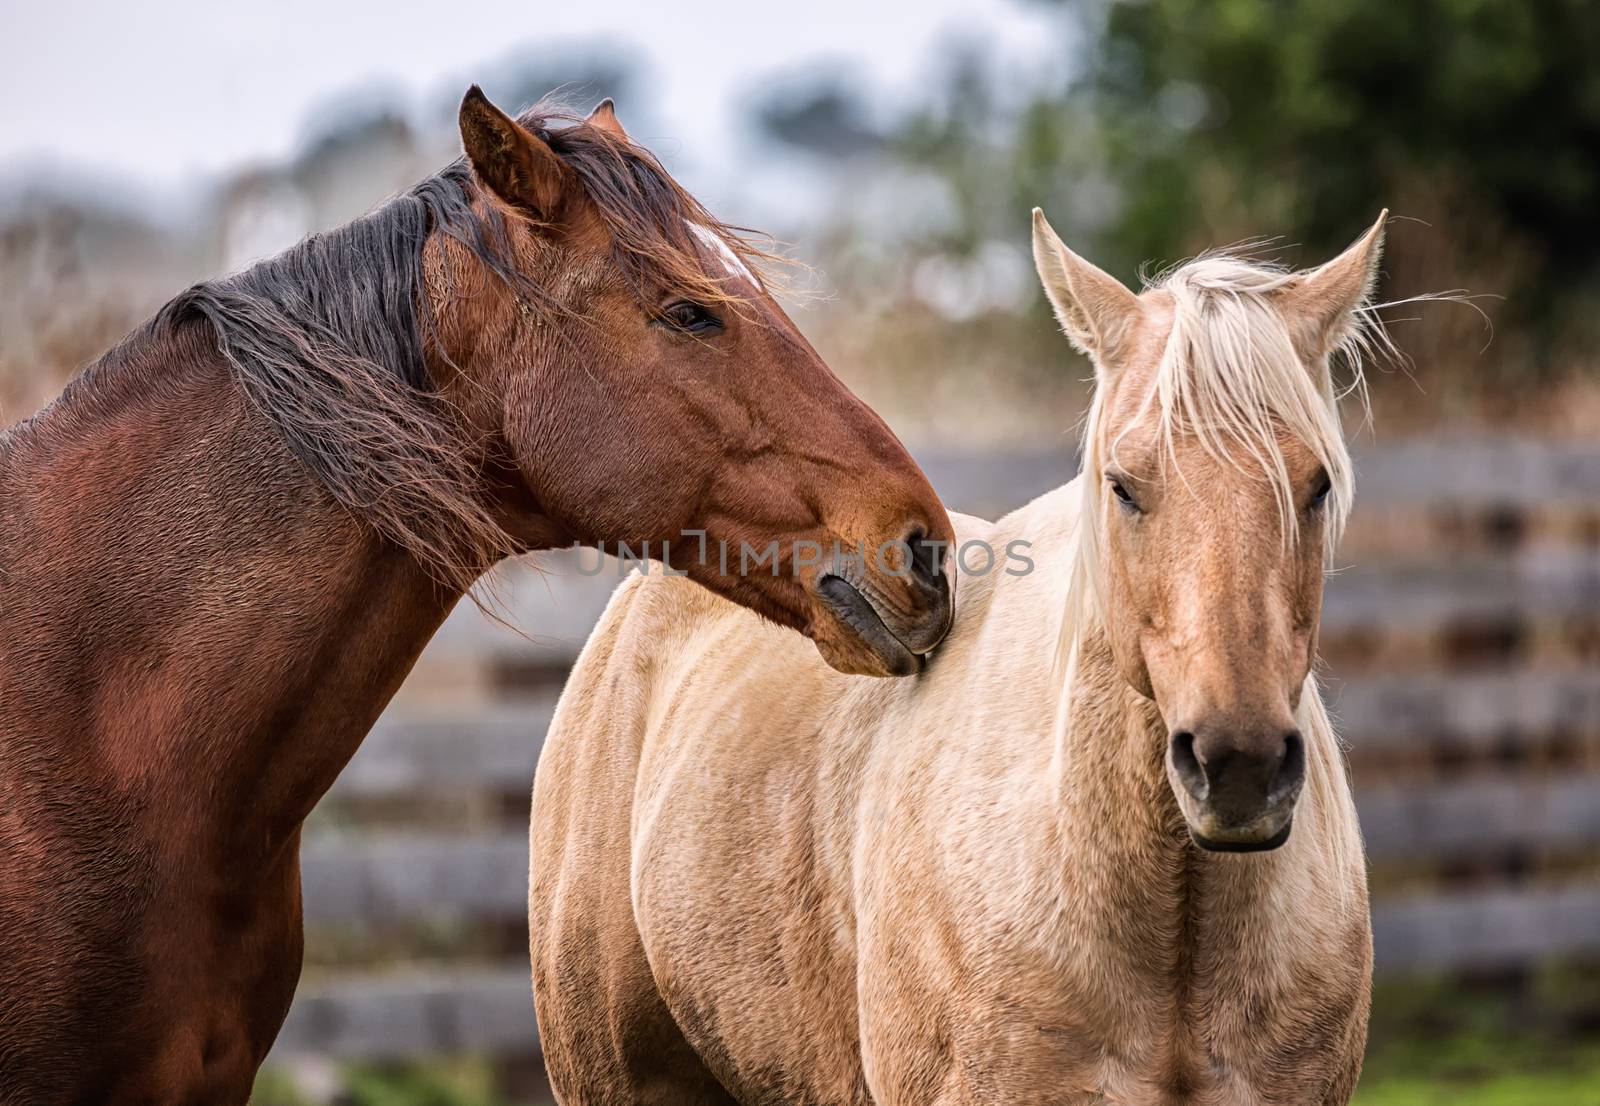 Horses at a Farm in Northern Californa by backyard_photography